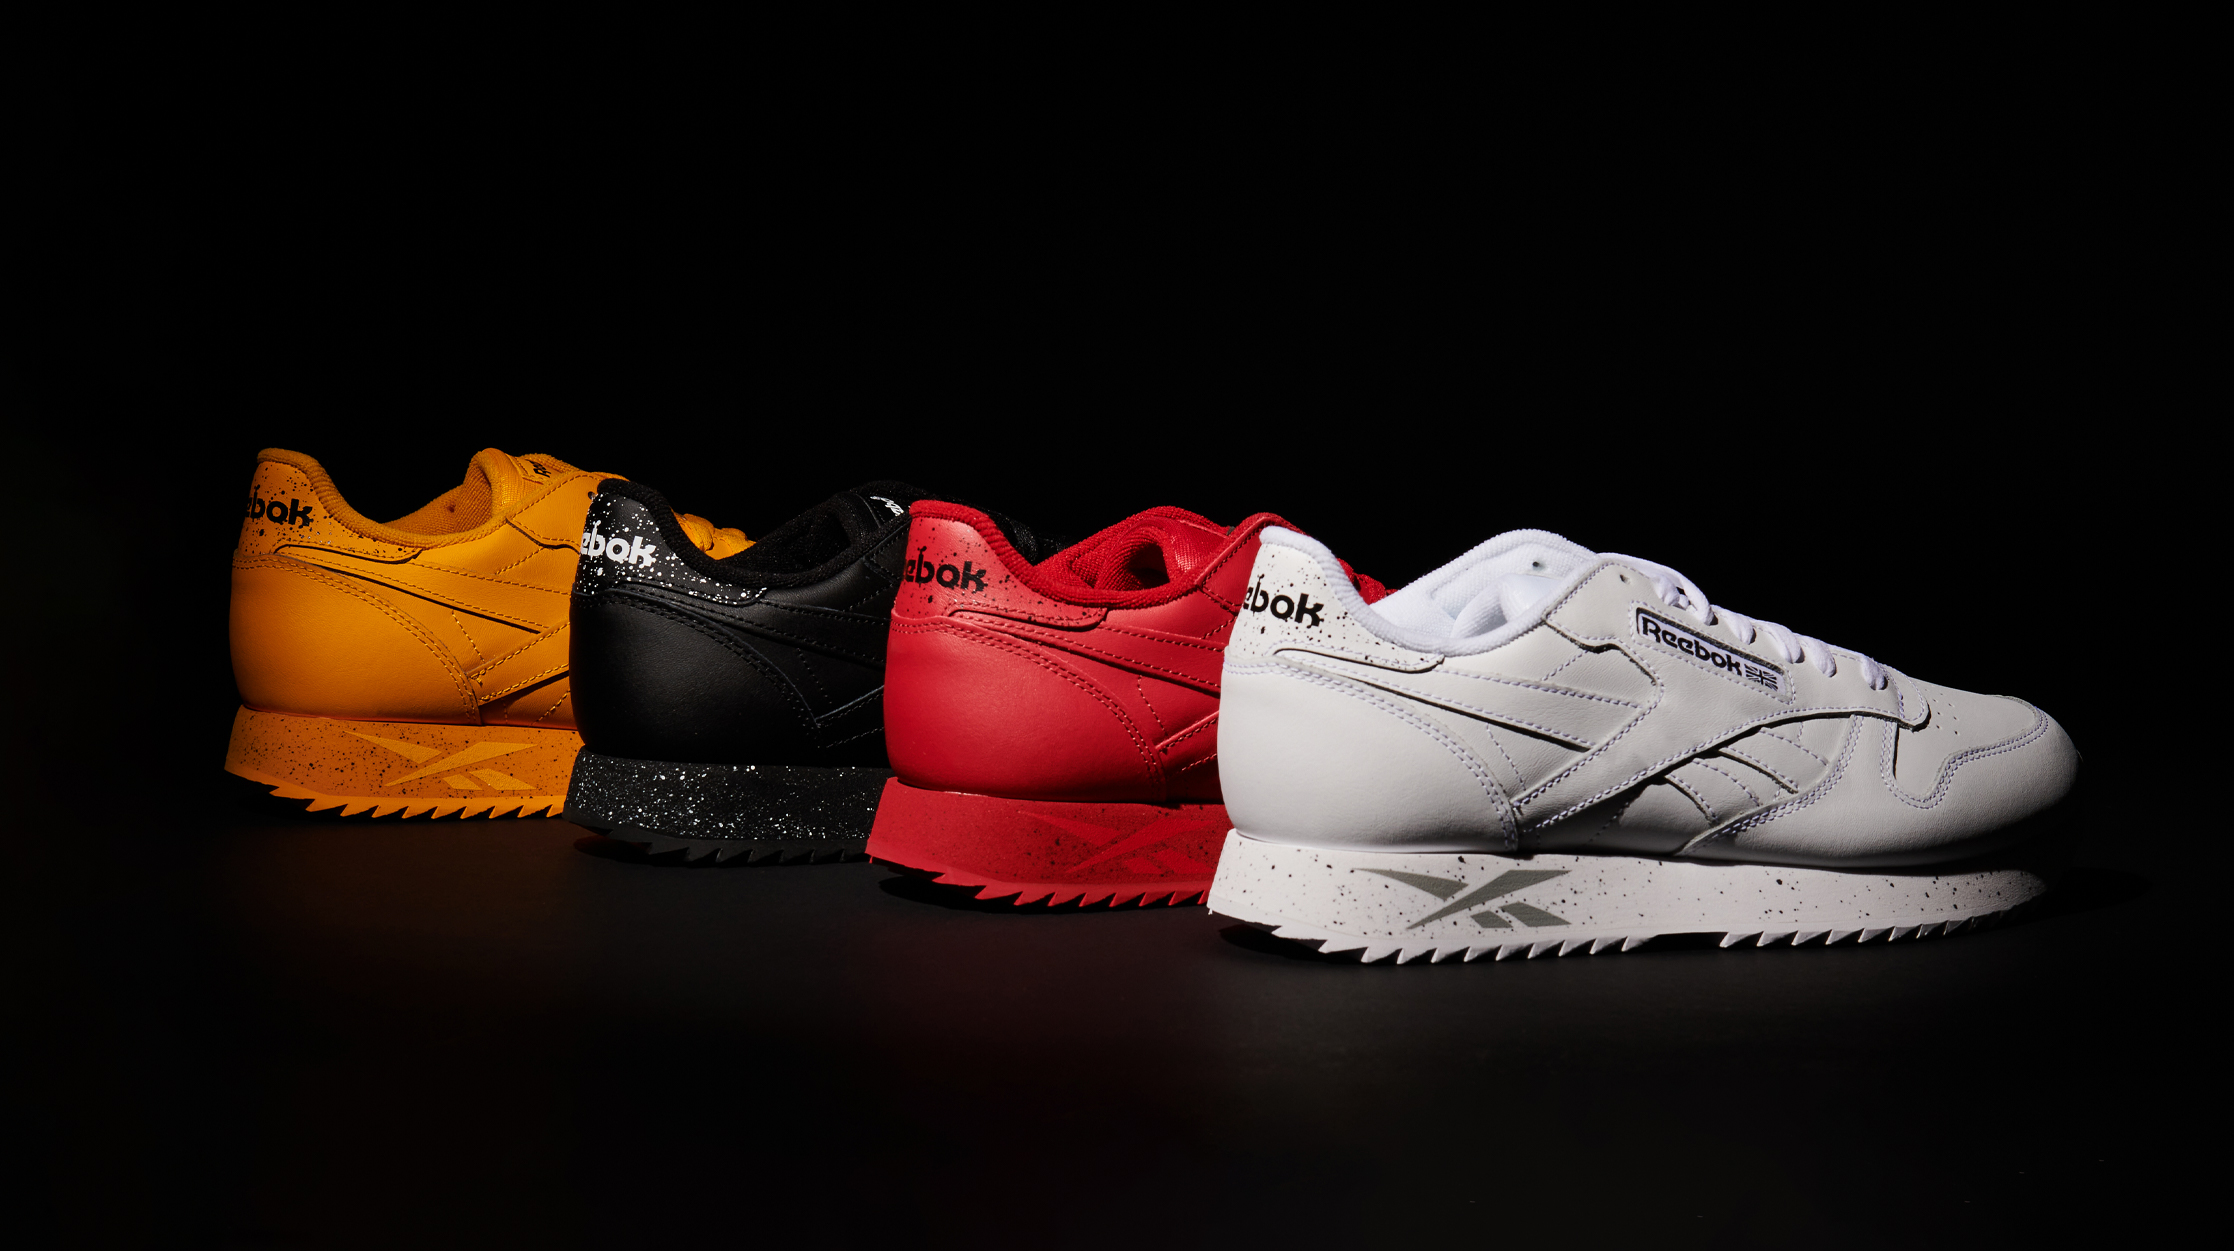 Champs Sports on Twitter: "Take your pick 🤔 The Reebok Leather " Speckle" coming soon... https://t.co/yvCHmijCfC" / Twitter